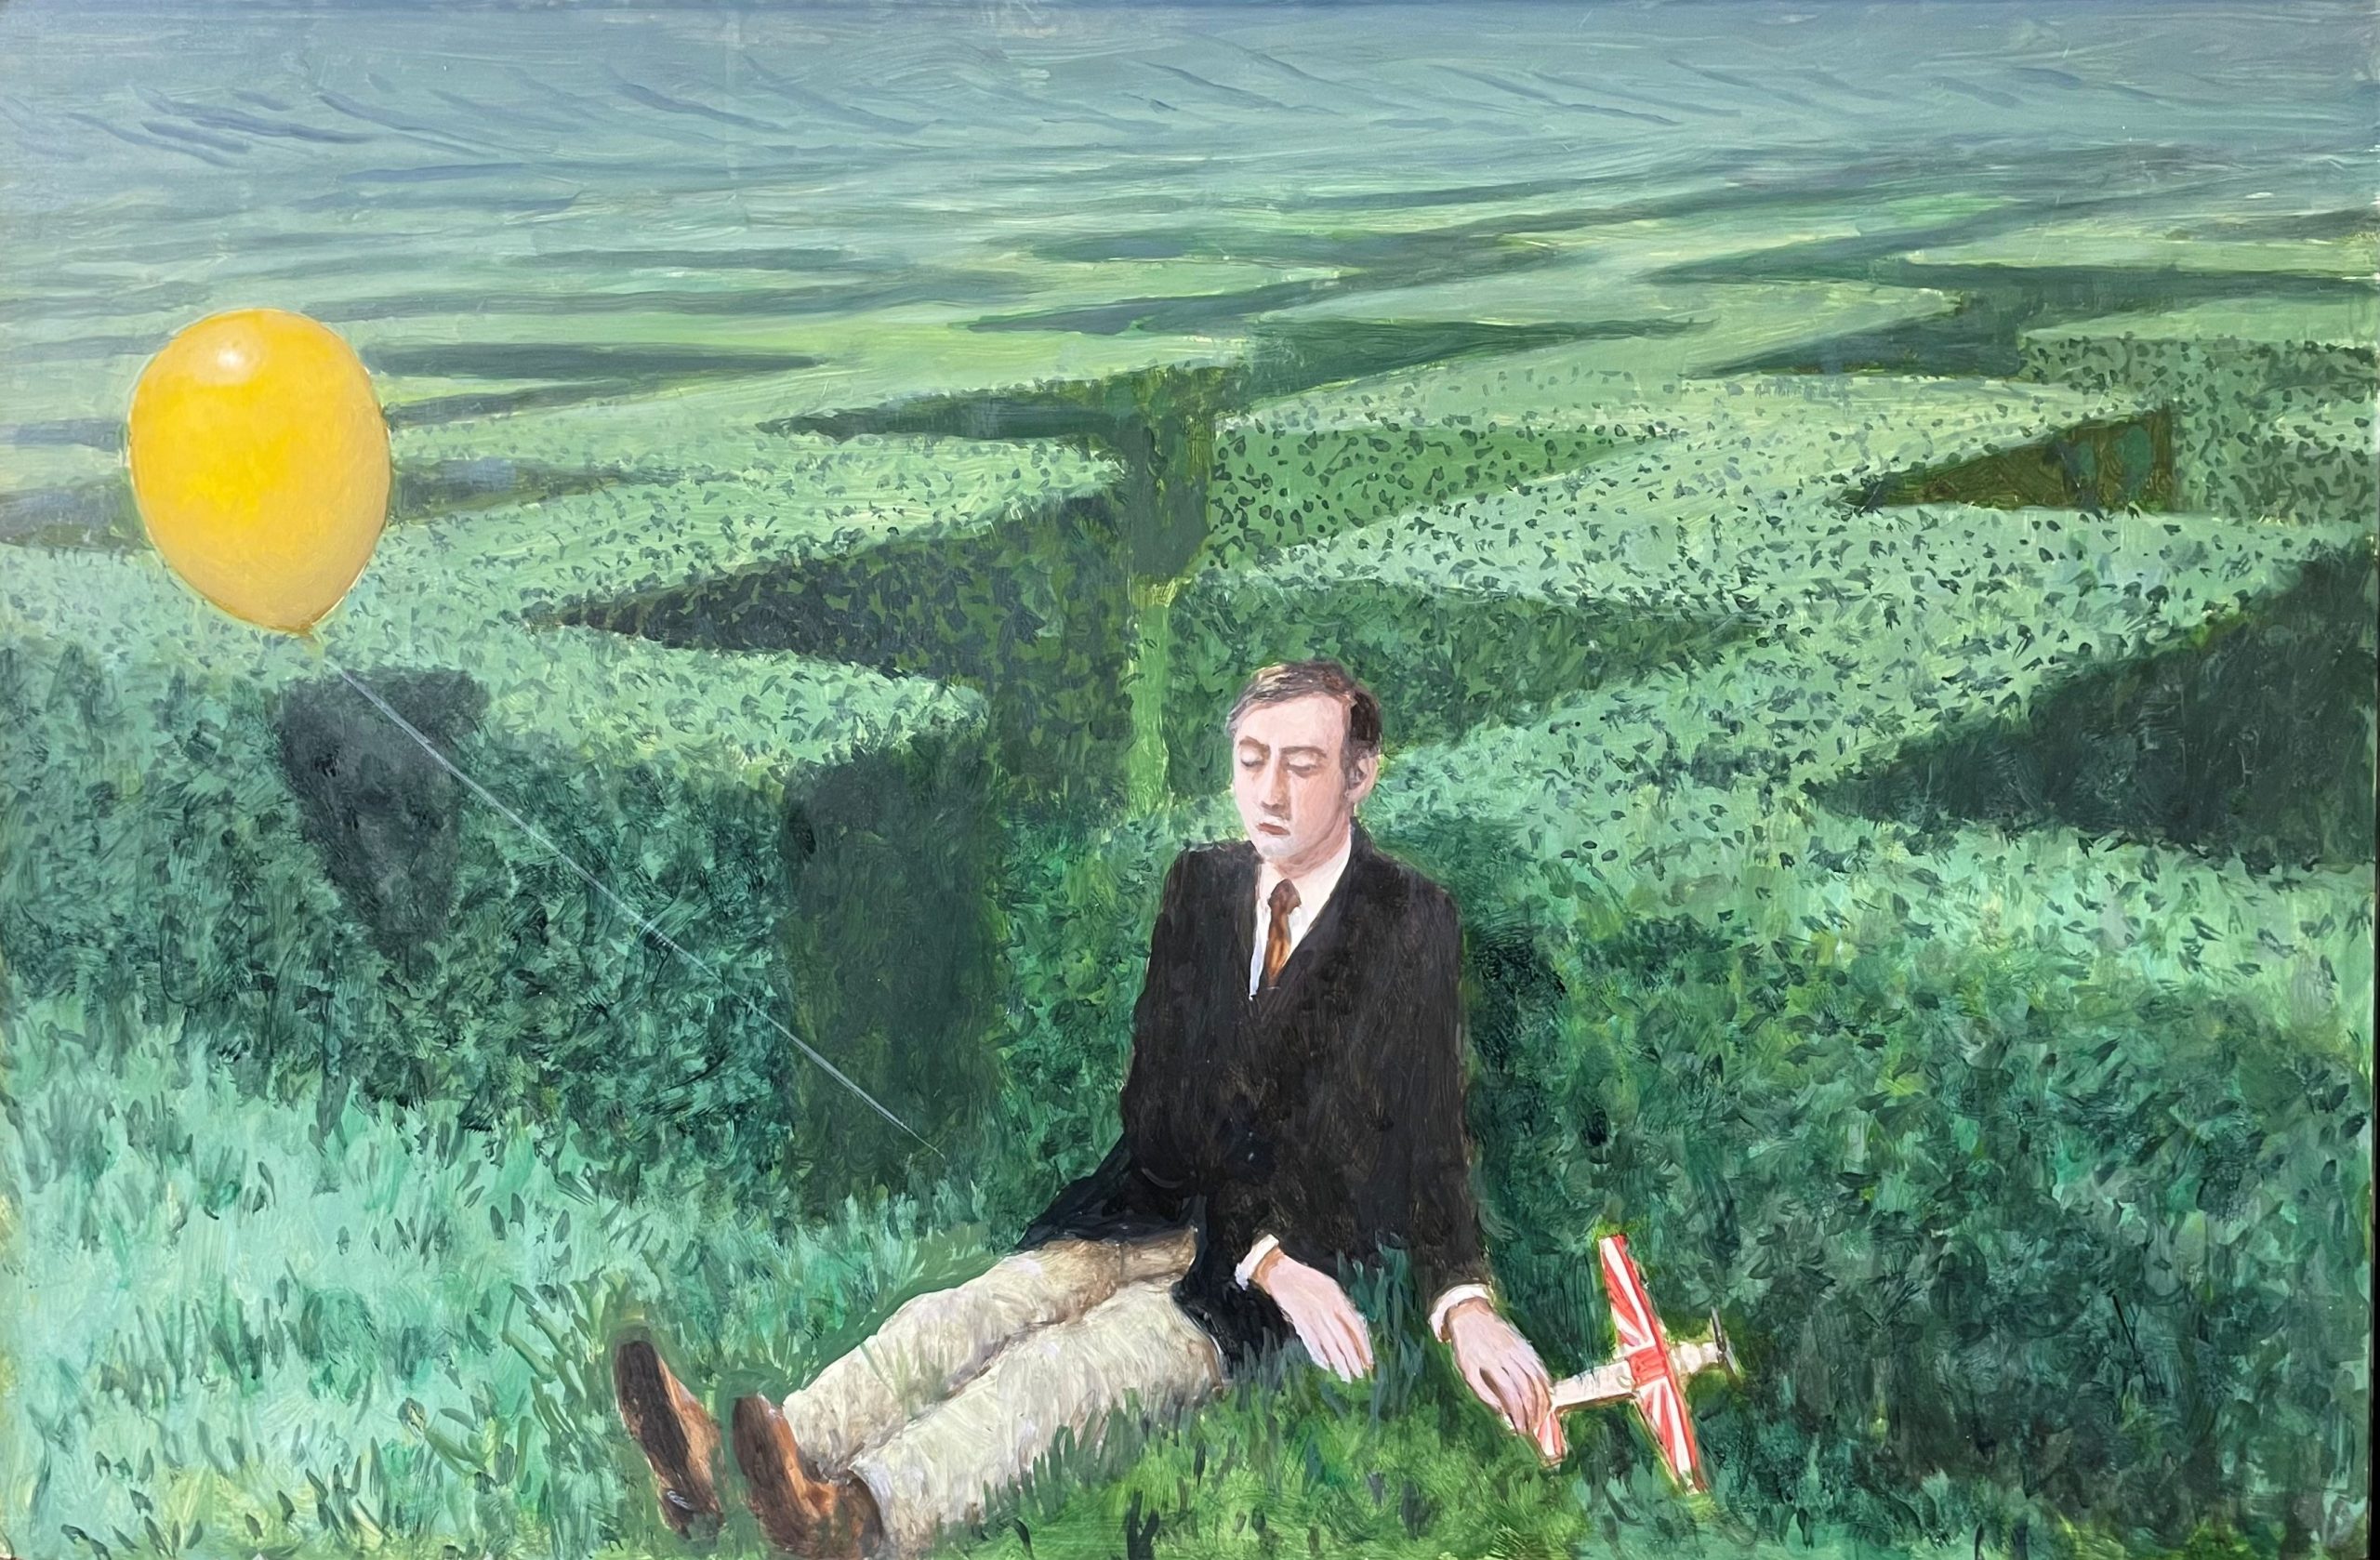 Mike Worrall 'The Reluctant Adult' oil on wood panel 40 x 60cm $6000